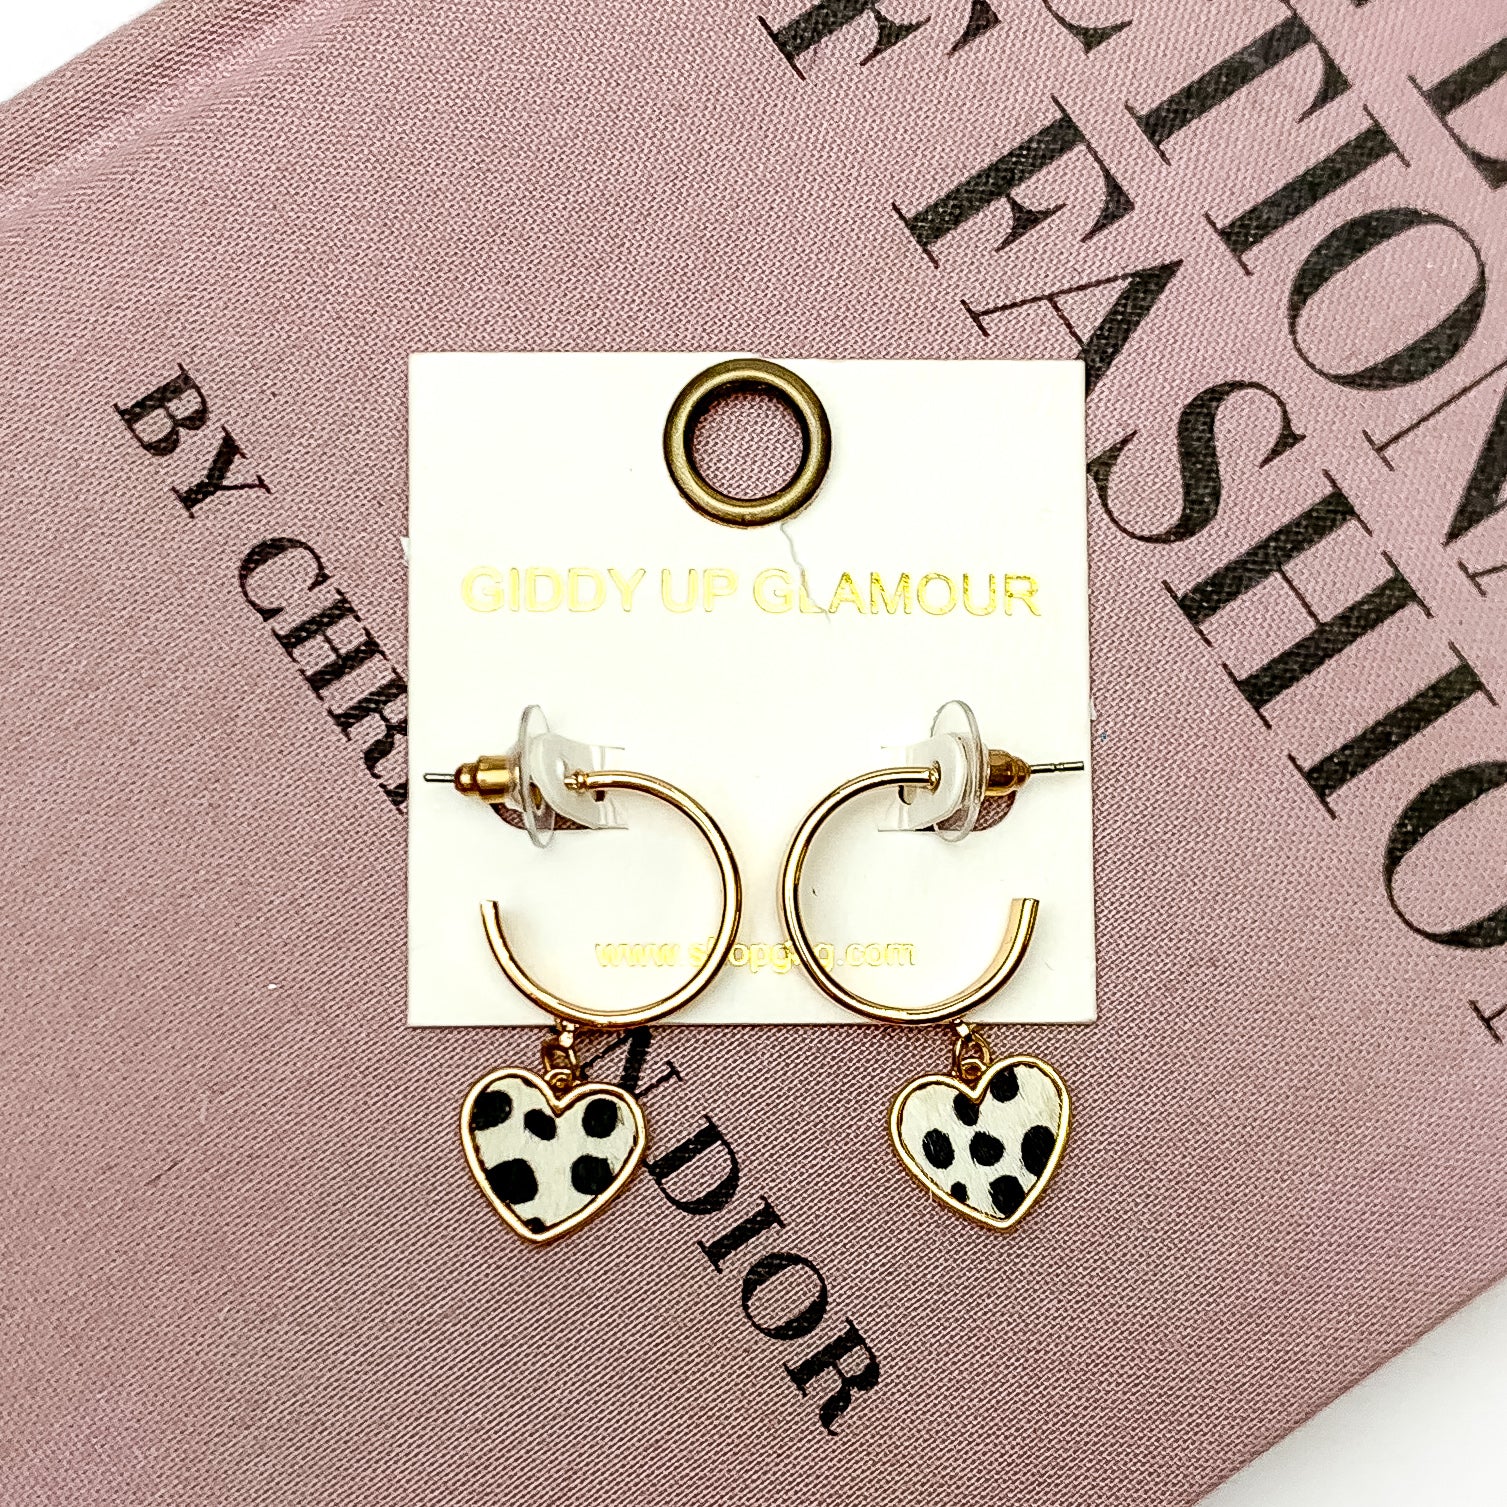 Gold Tone Hoop Earrings with Heart Dangle in White Dotted Print - Giddy Up Glamour Boutique